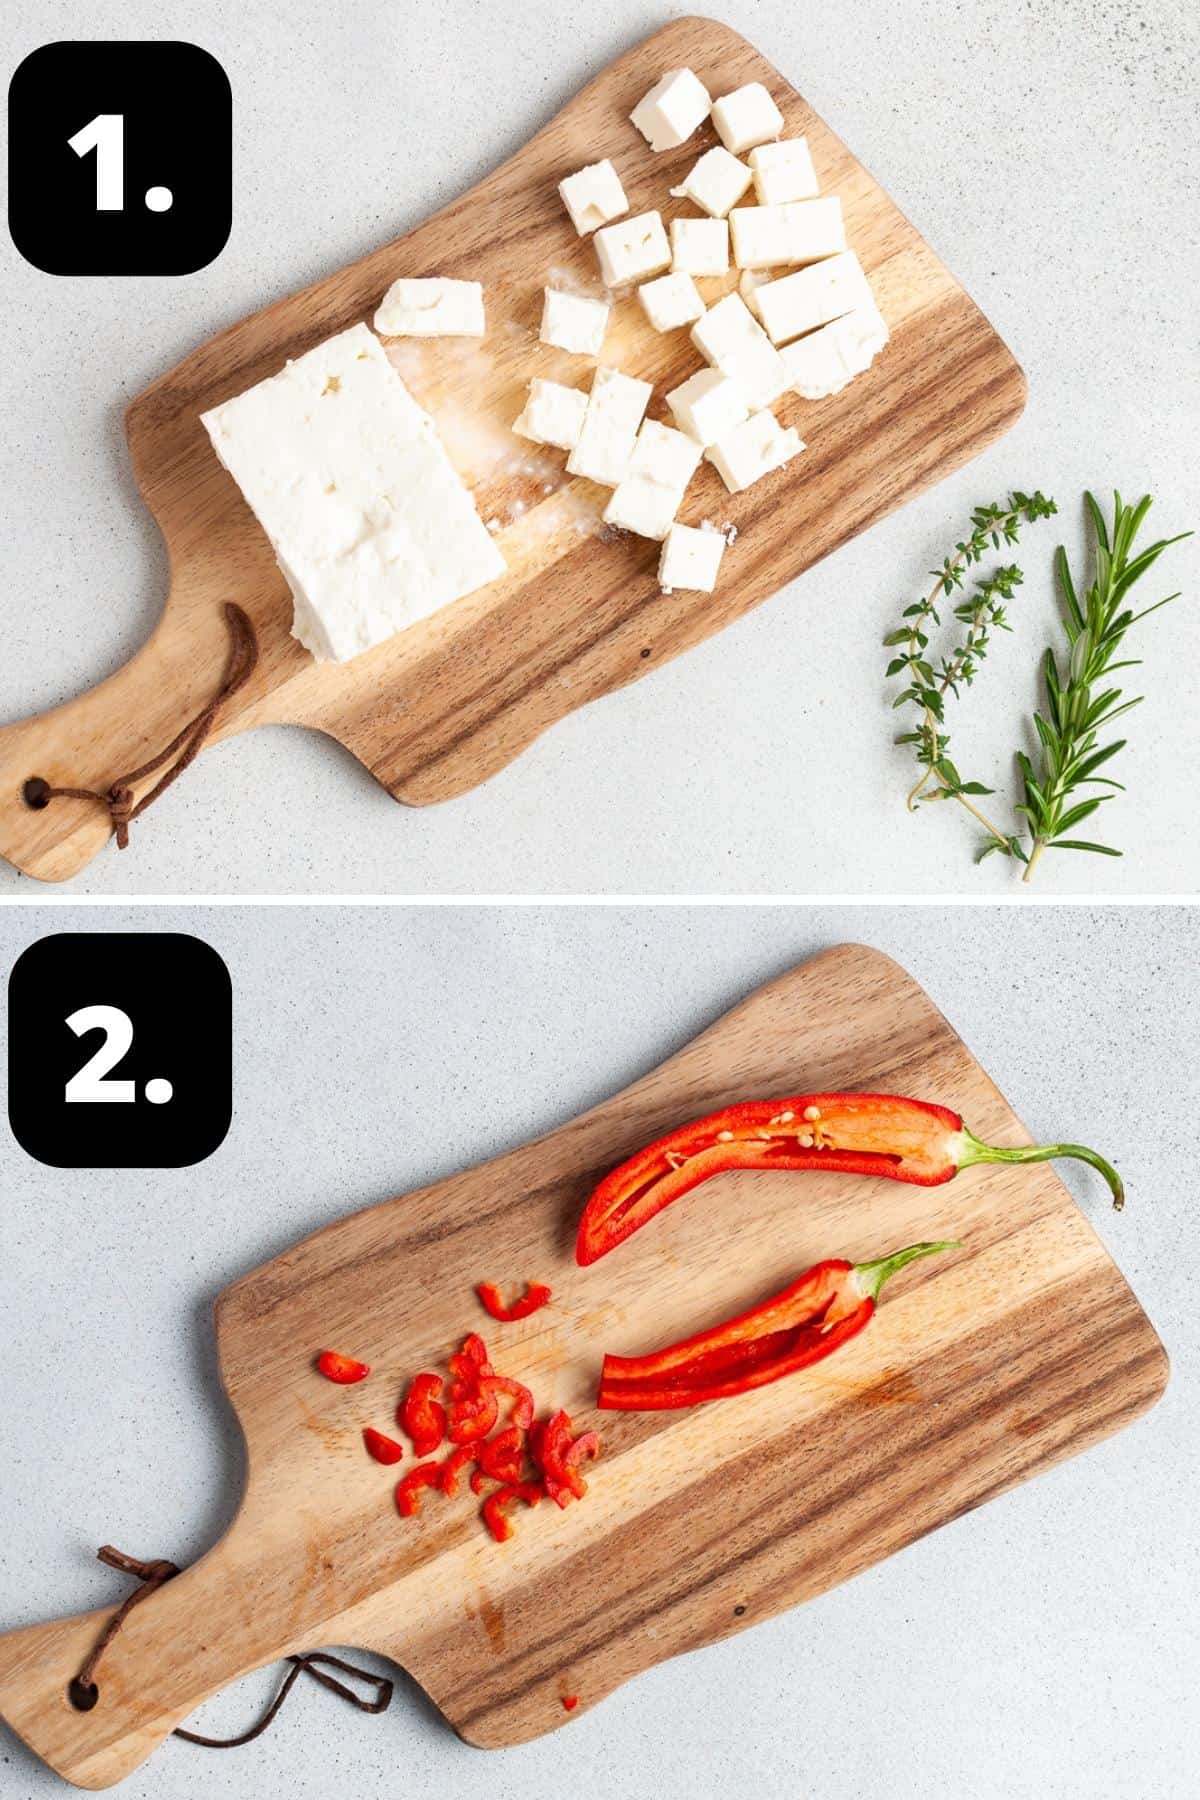 Steps 1-2 of preparing this recipe - chopping up the feta cheese and slicing the red chilli peppers.